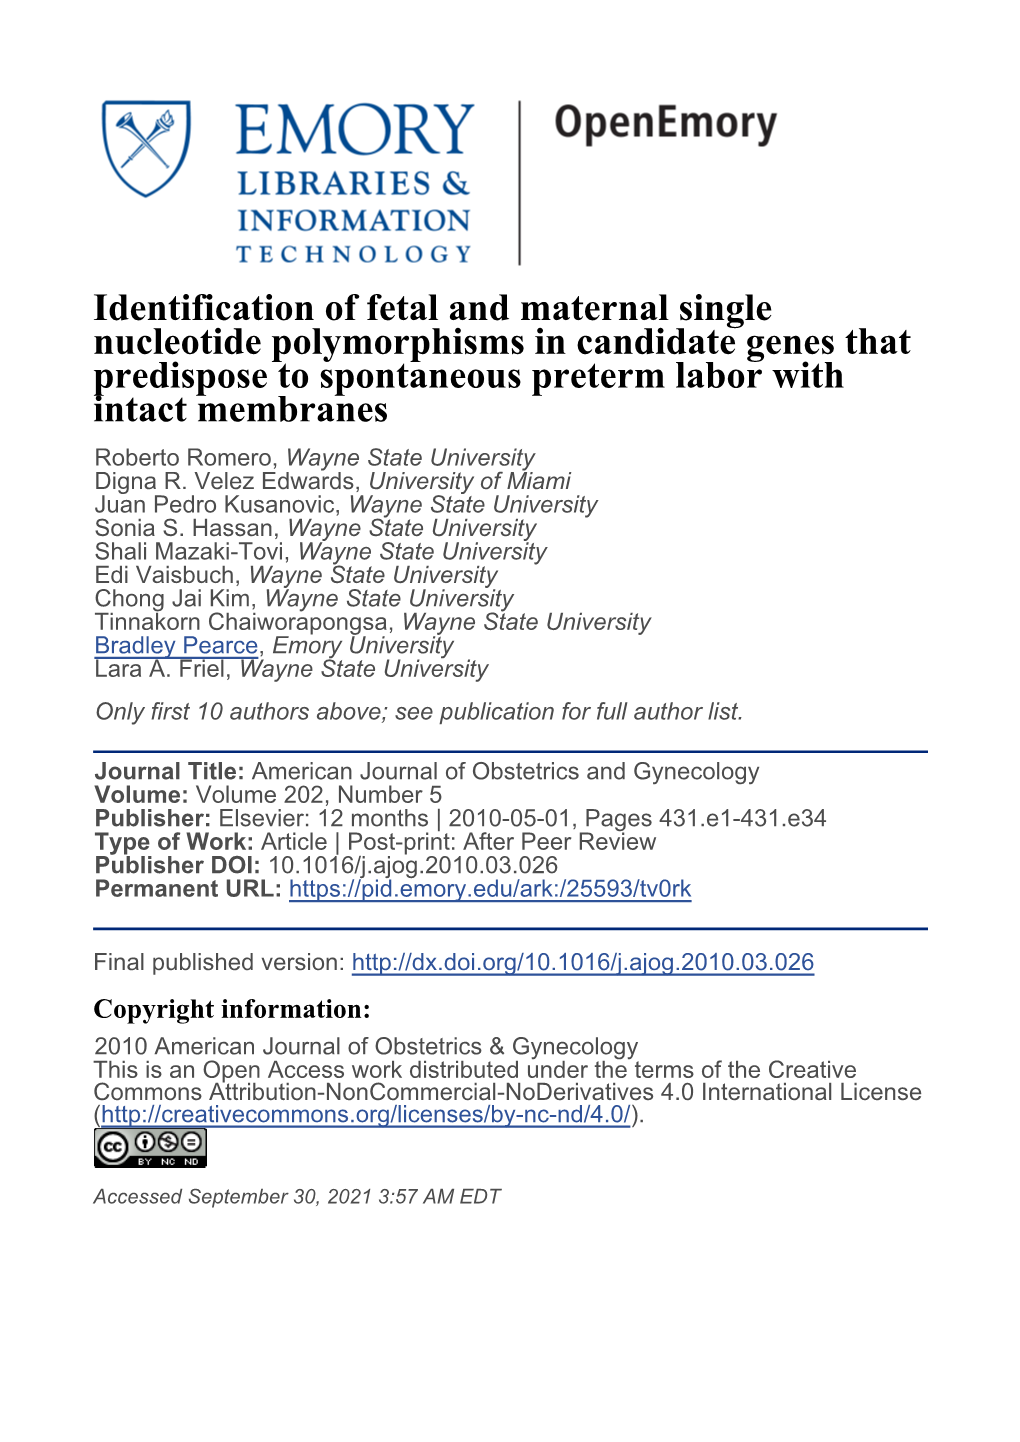 Identification of Fetal and Maternal Single Nucleotide Polymorphisms In